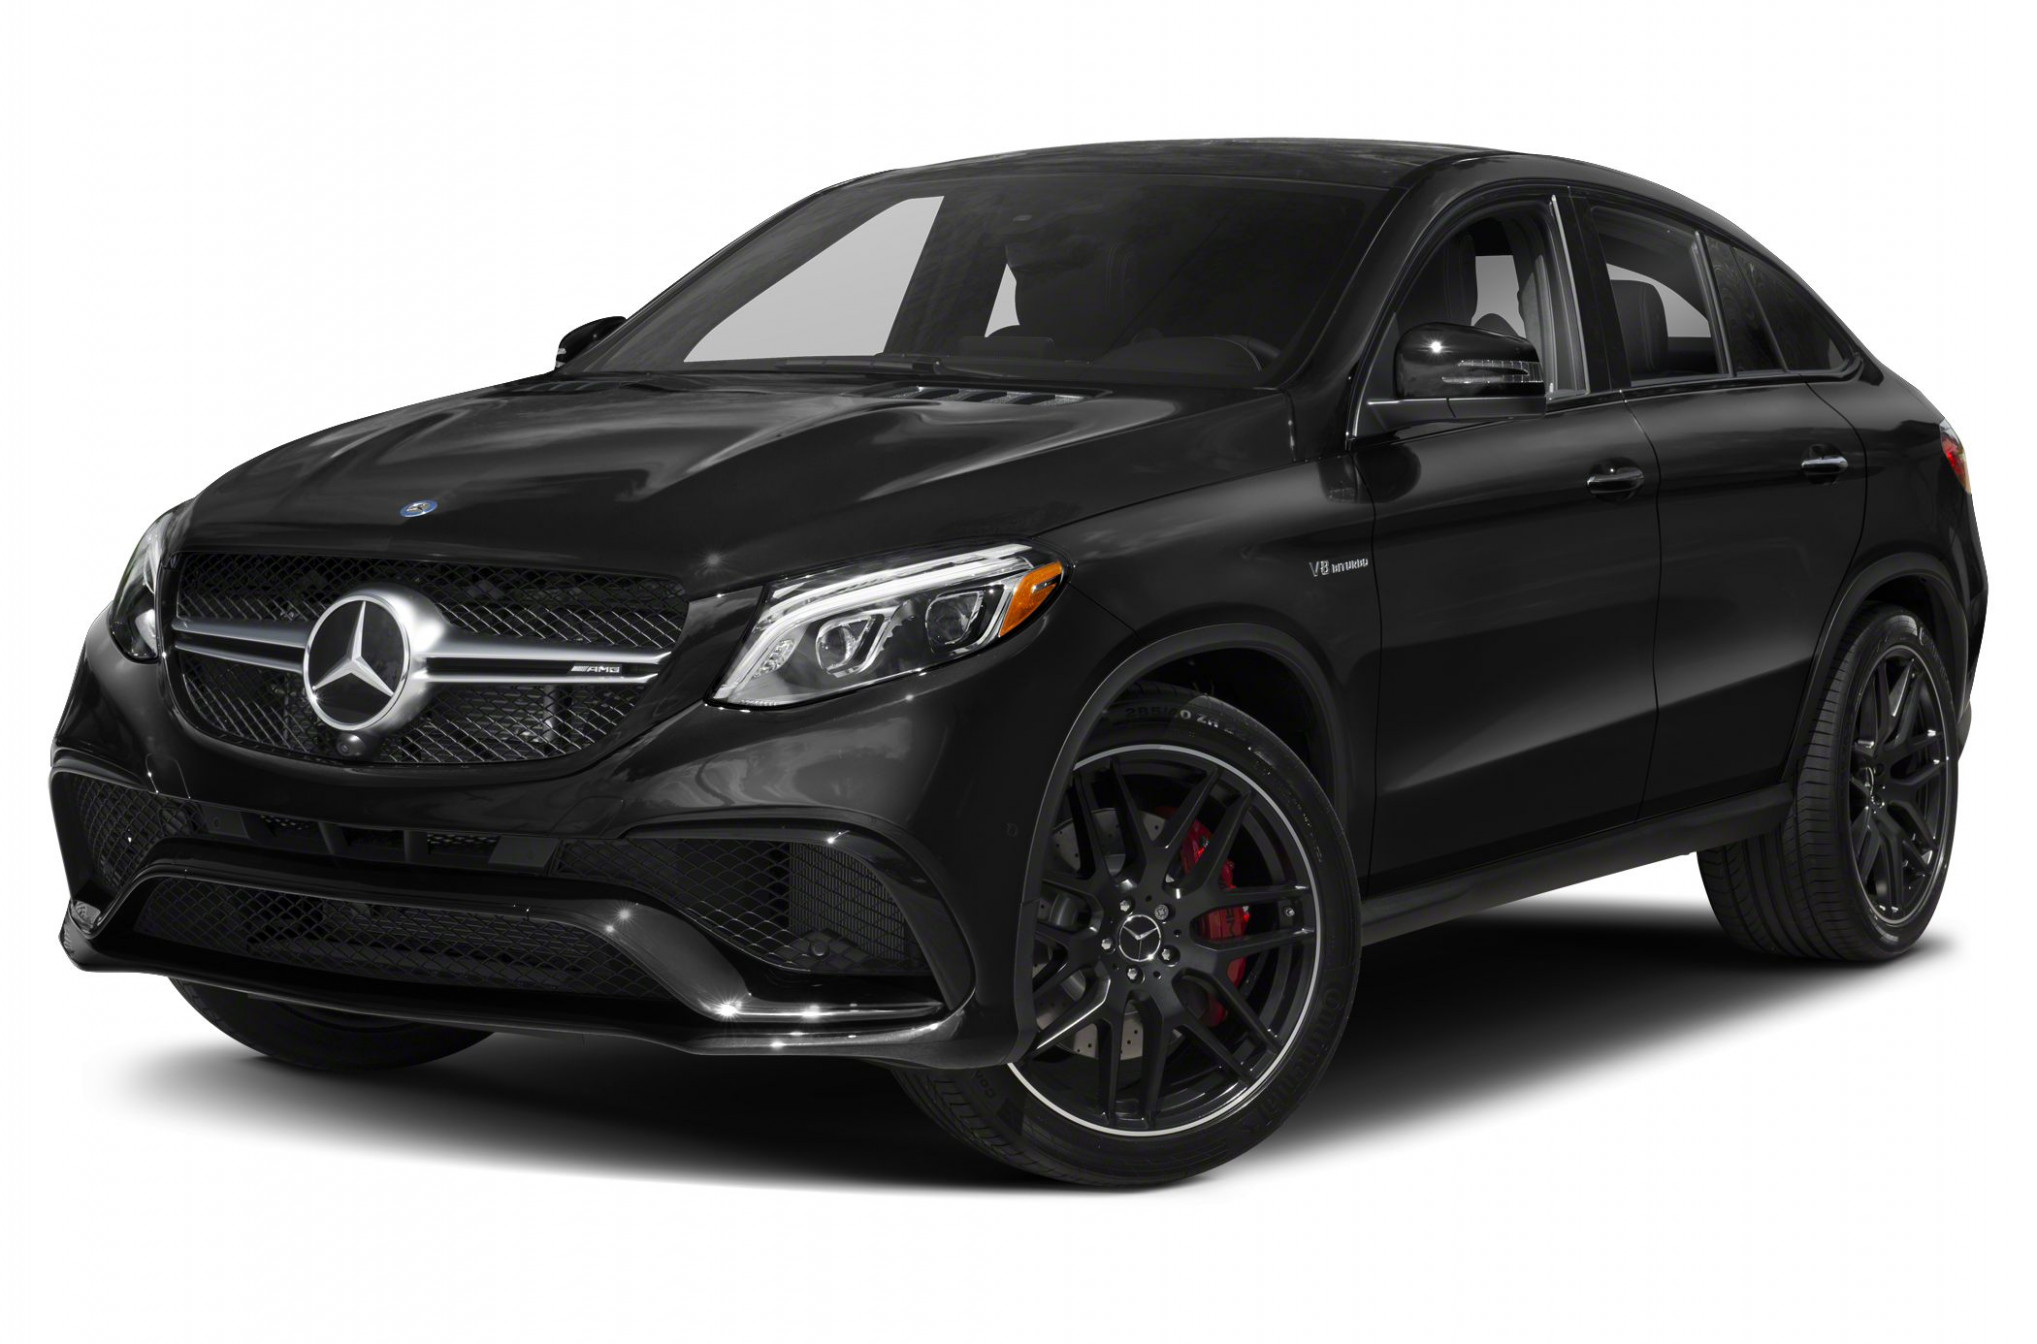 Exterior and Interior mercedes gle 63 amg price